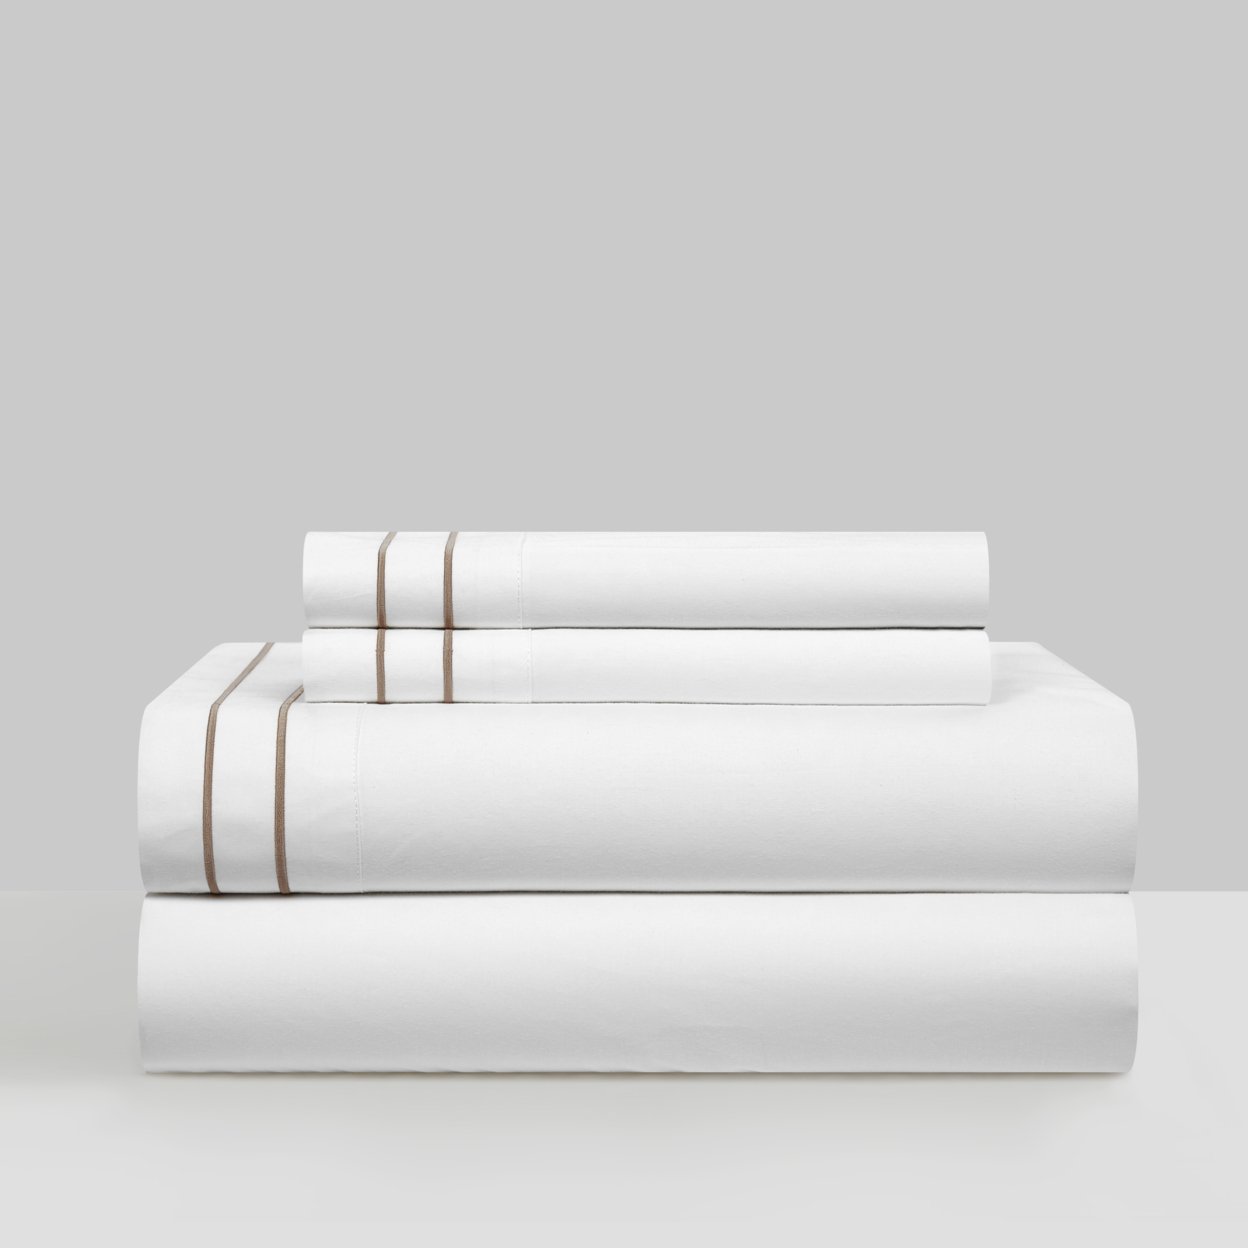 Balensia 4 Piece Organic Cotton Sheet Set Solid White With Dual Stripe Embroidery - Gold, King